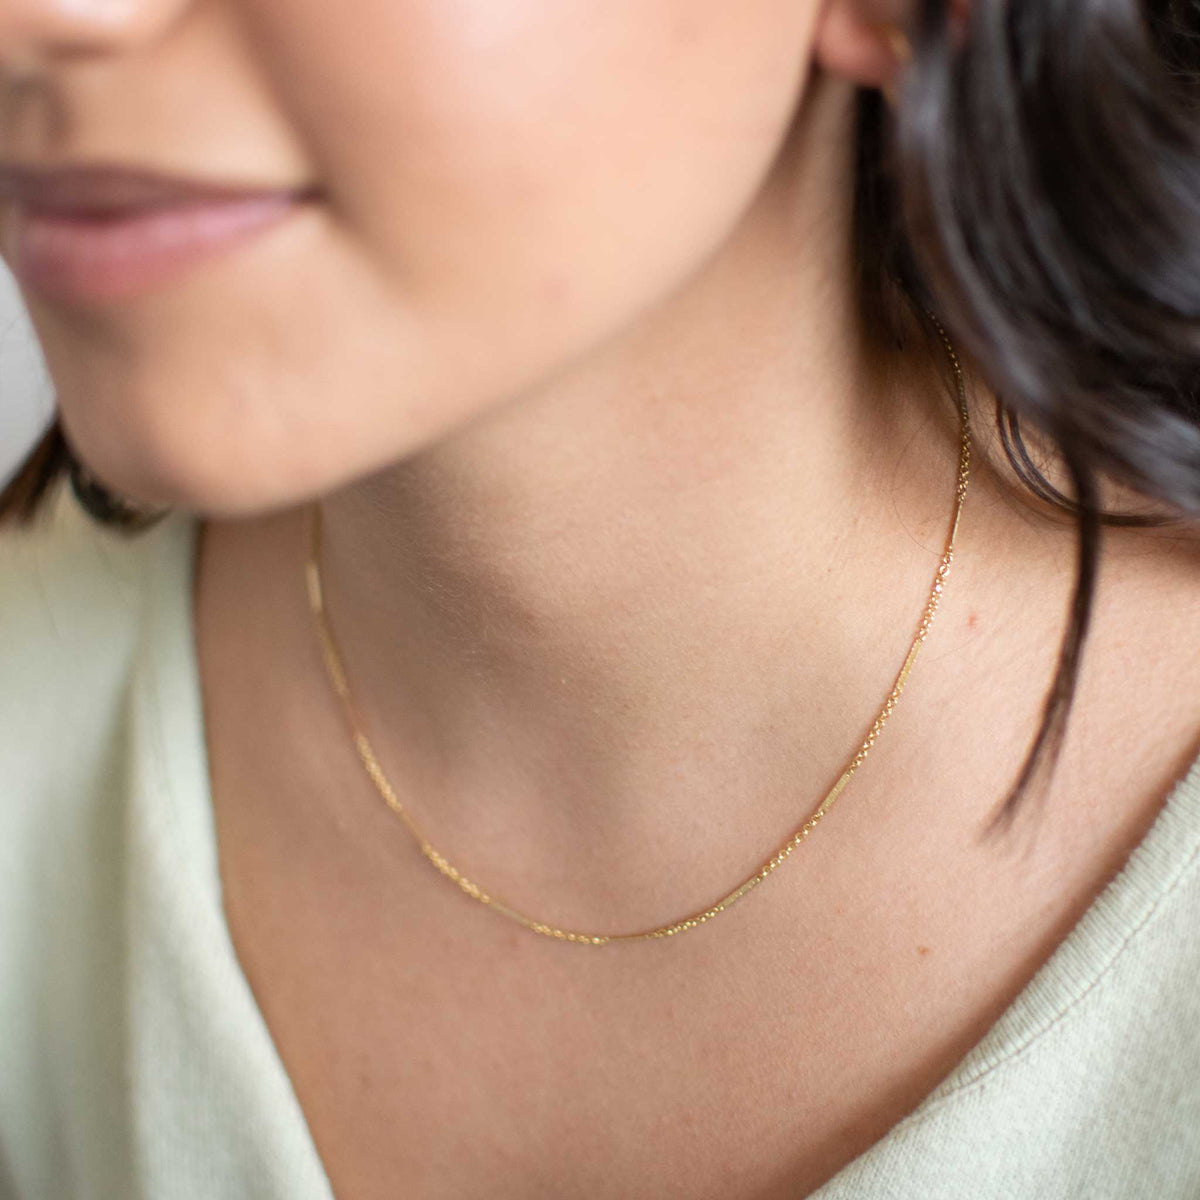 Gold Bar Necklace worn by a woman. 